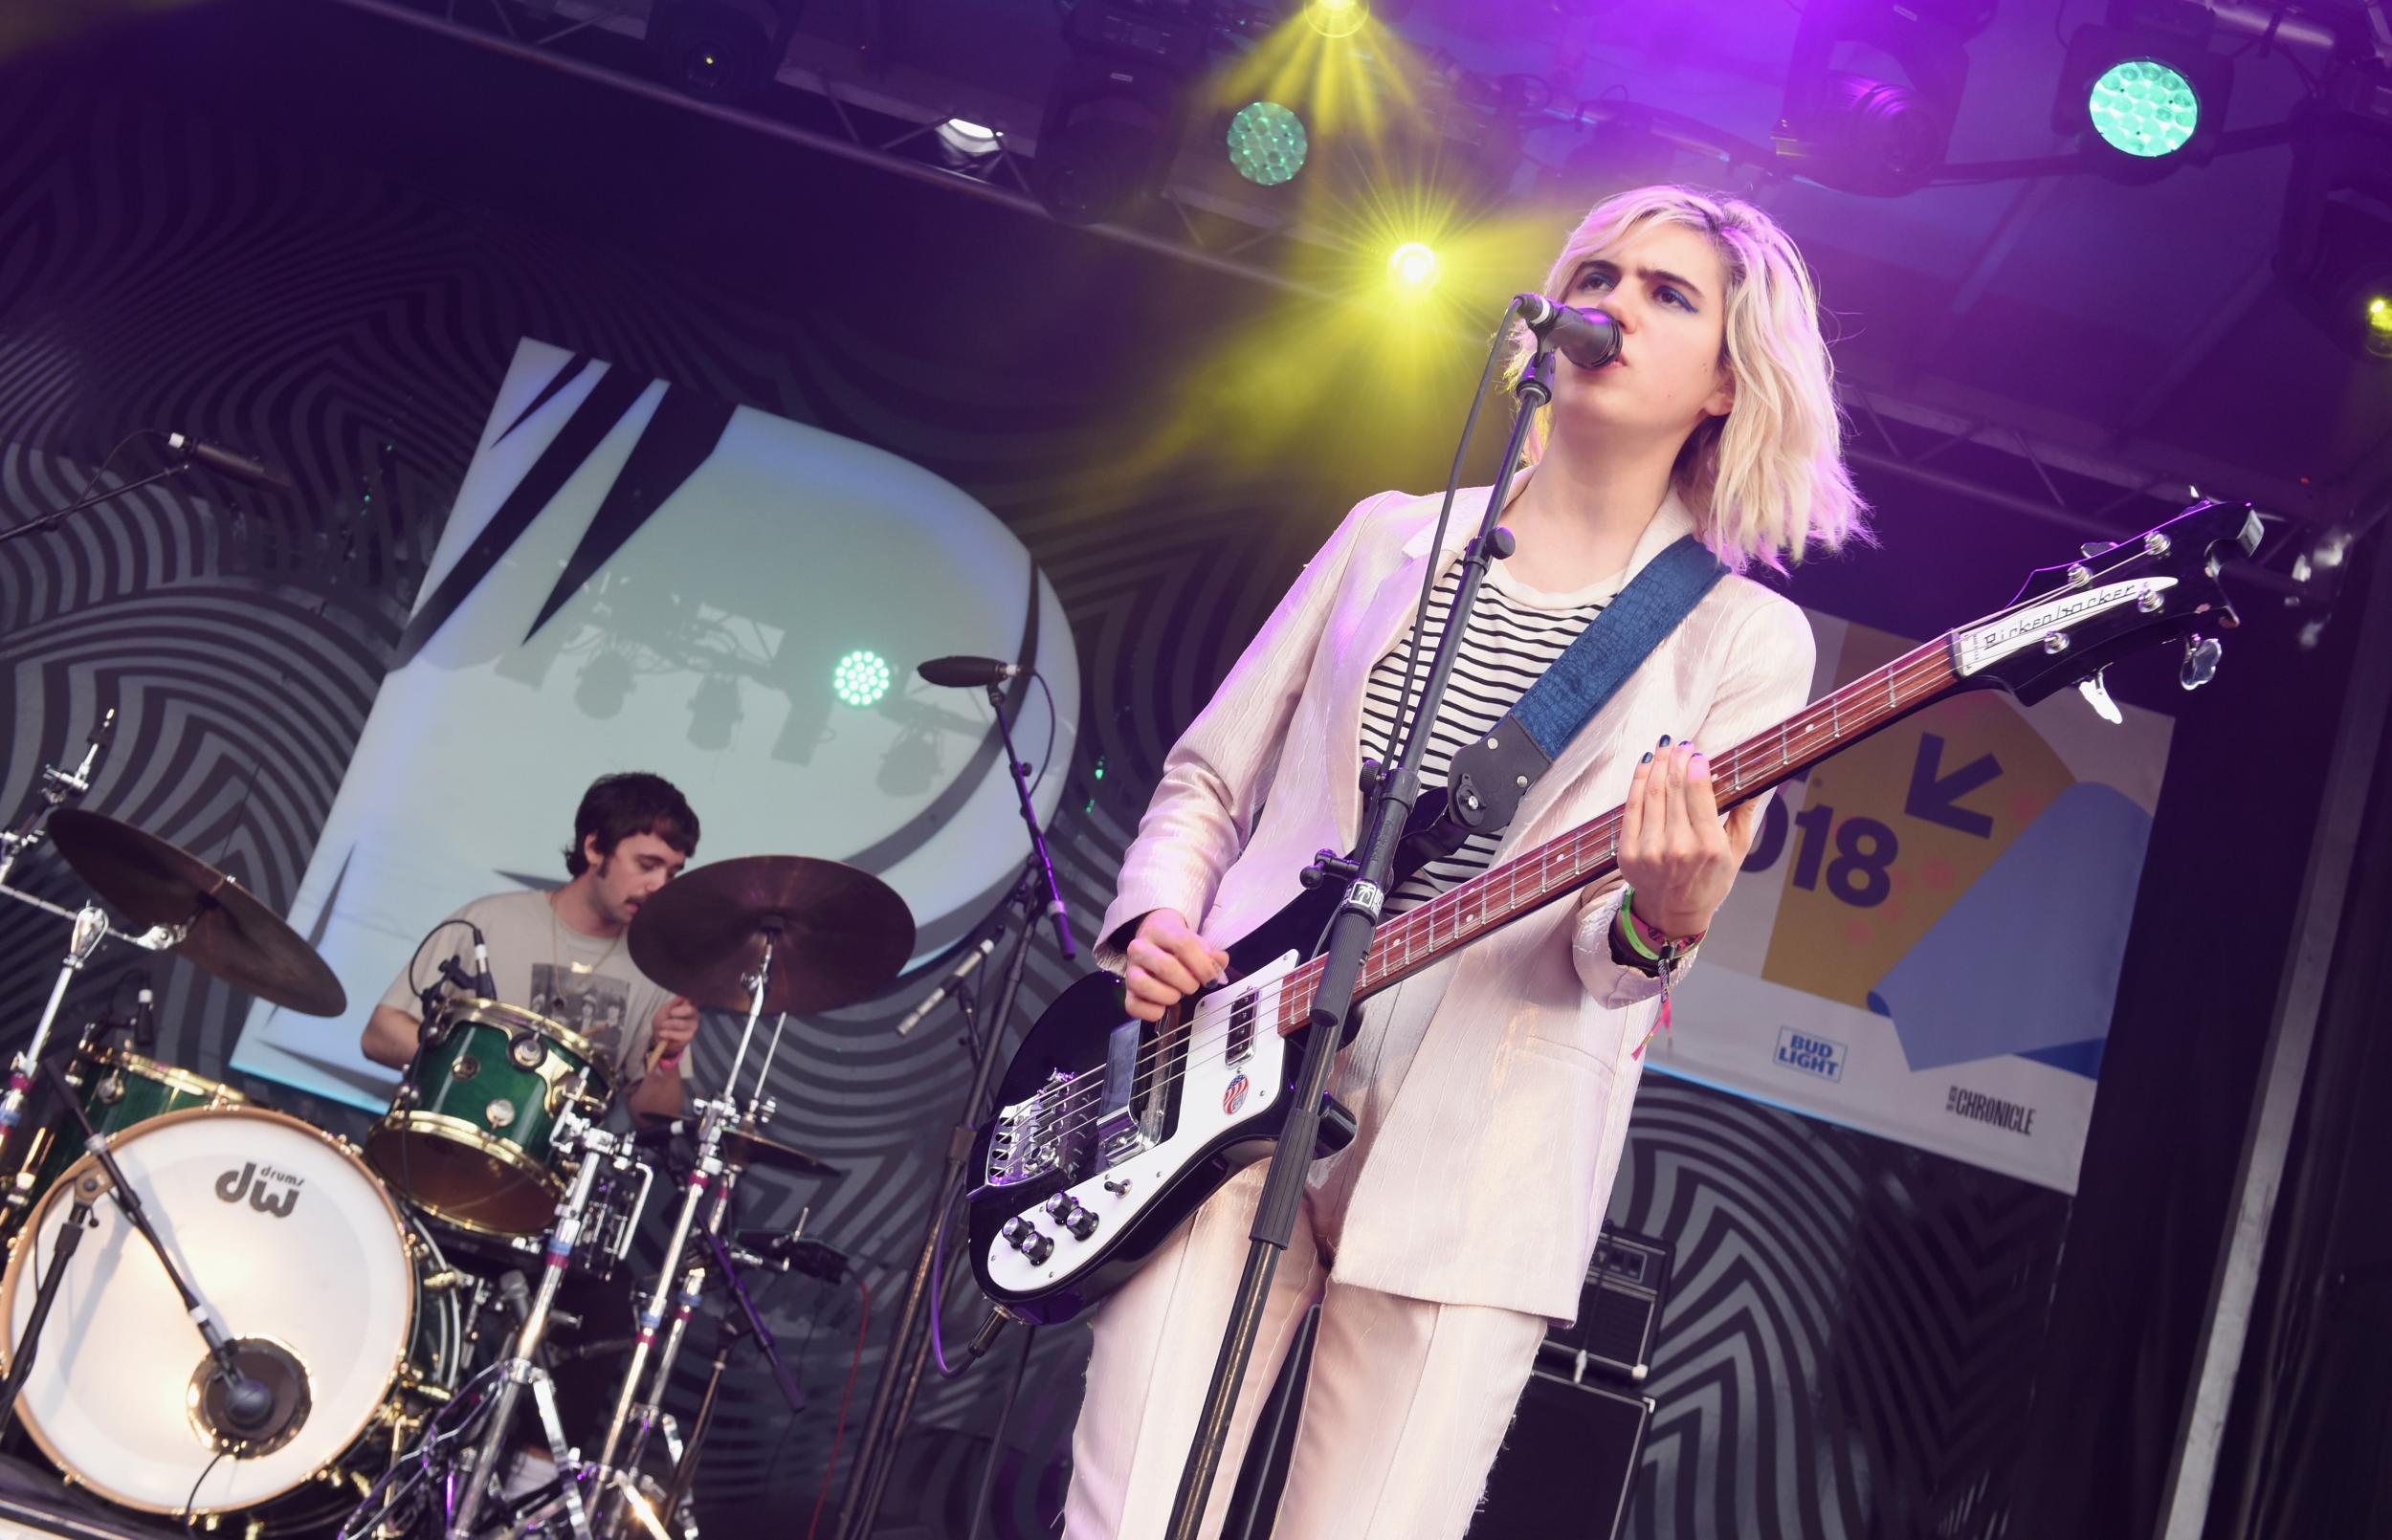 Nick Kivlen and Julia Cumming of Sunflower Bean perform onstage during Pandora SXSW 2018 on March 15, 2018 in Austin, Texas